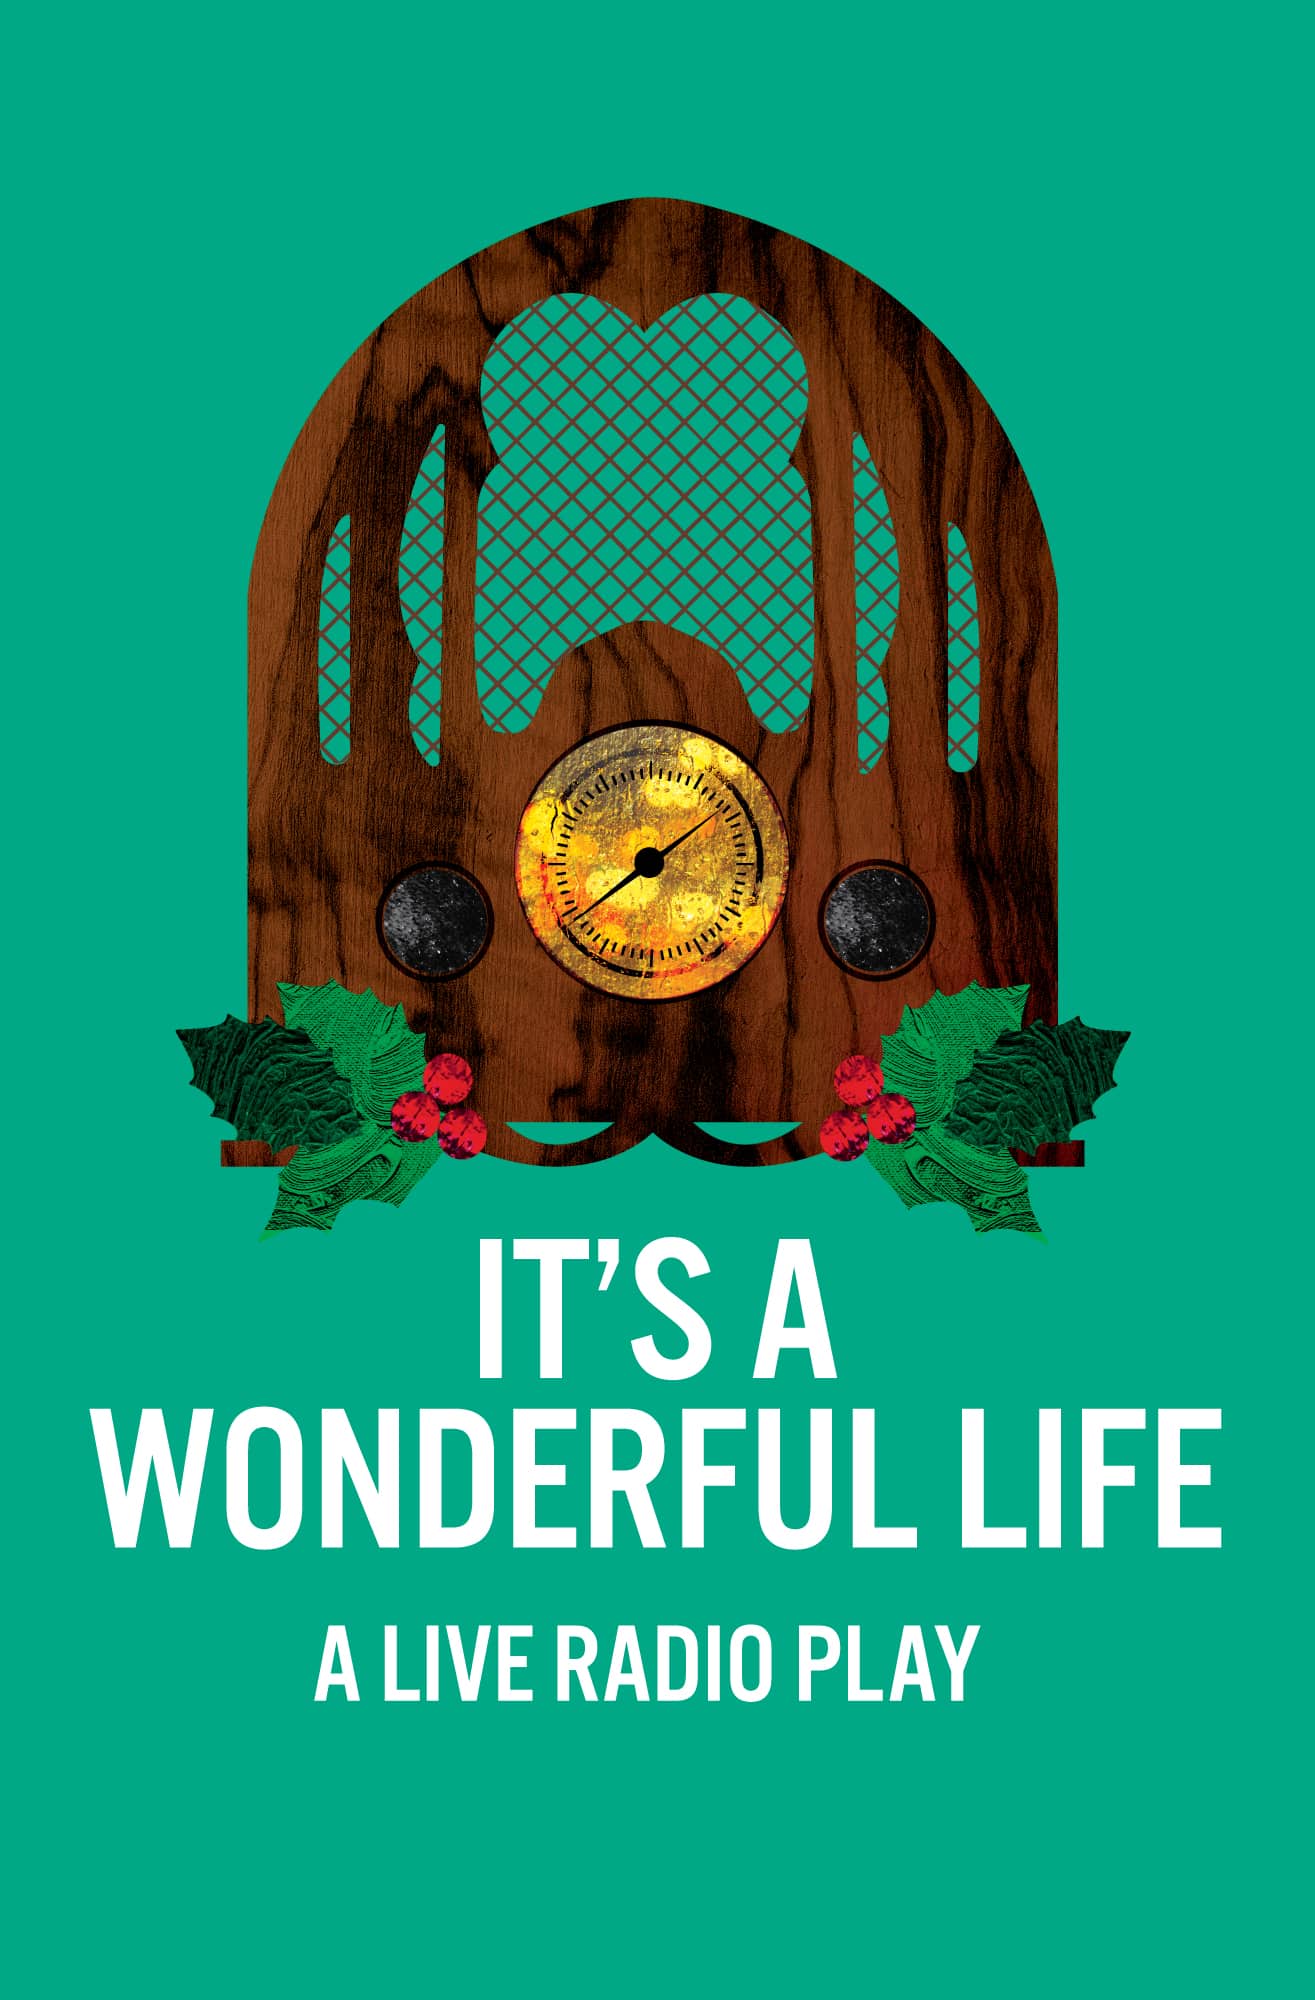 Show Graphic It's A Wonderful Life: Live Radio Play